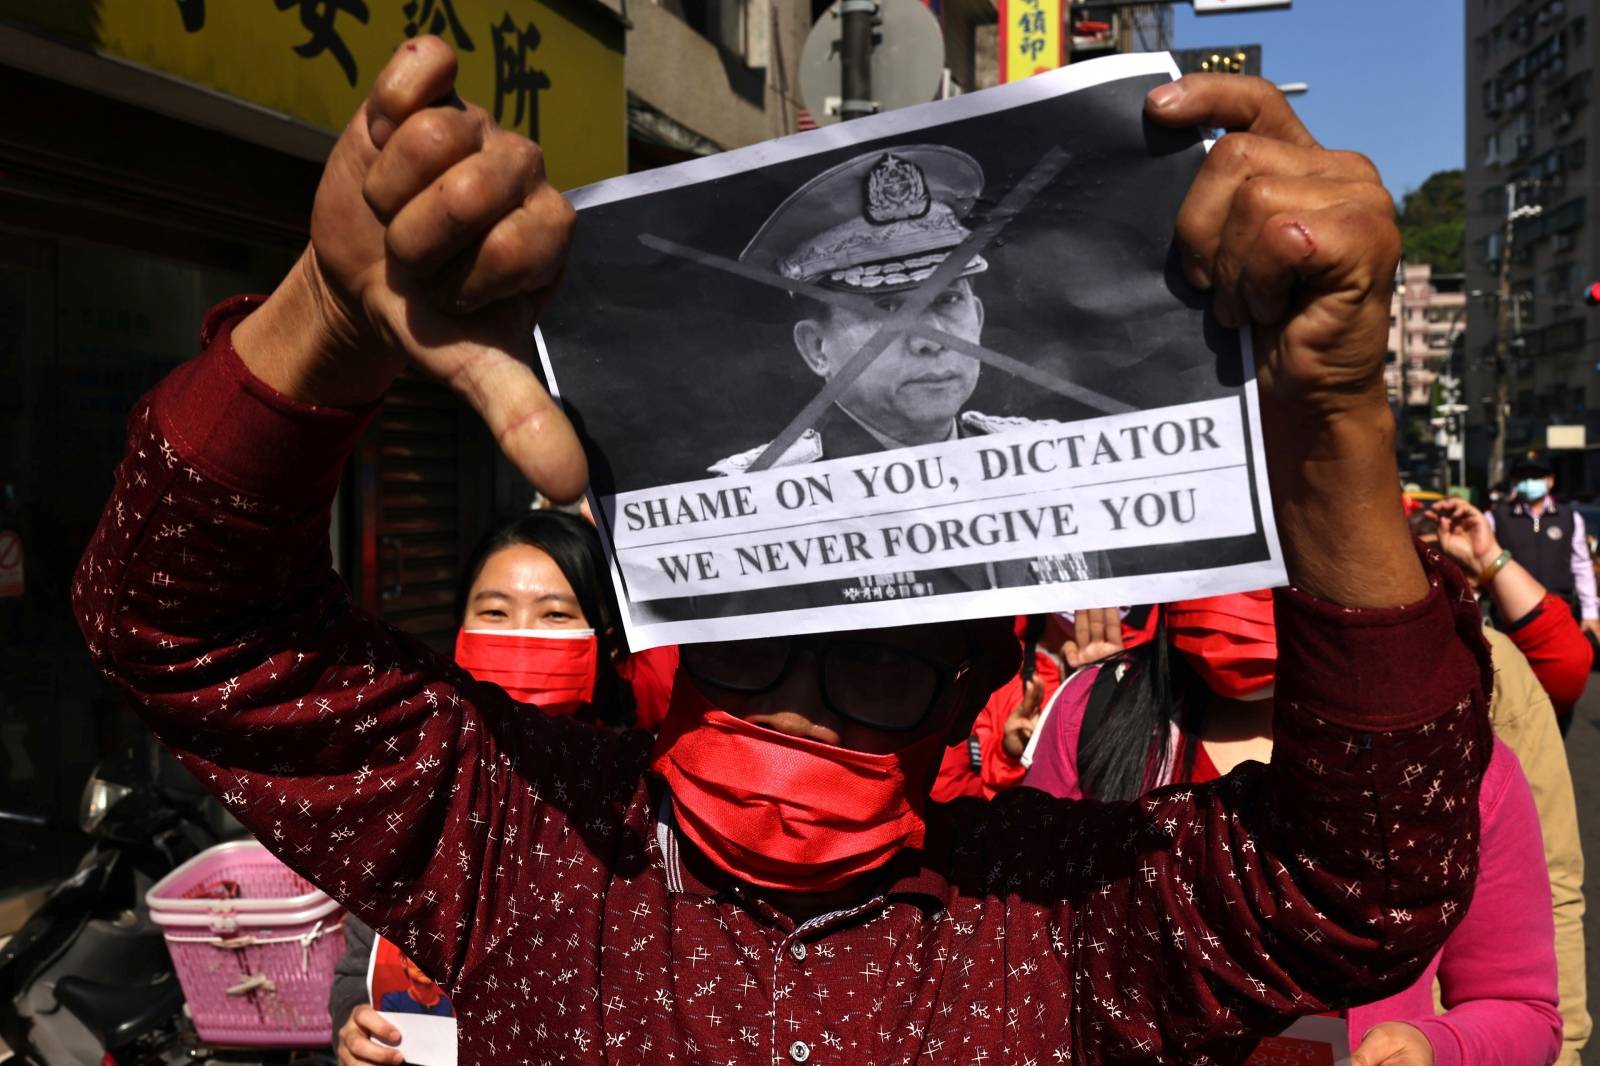 Members of the Burmese community in Taipei protest against the Myanmar military coup in Little Burma, home to many of Taiwan's Burmese immigrants, in Taipei